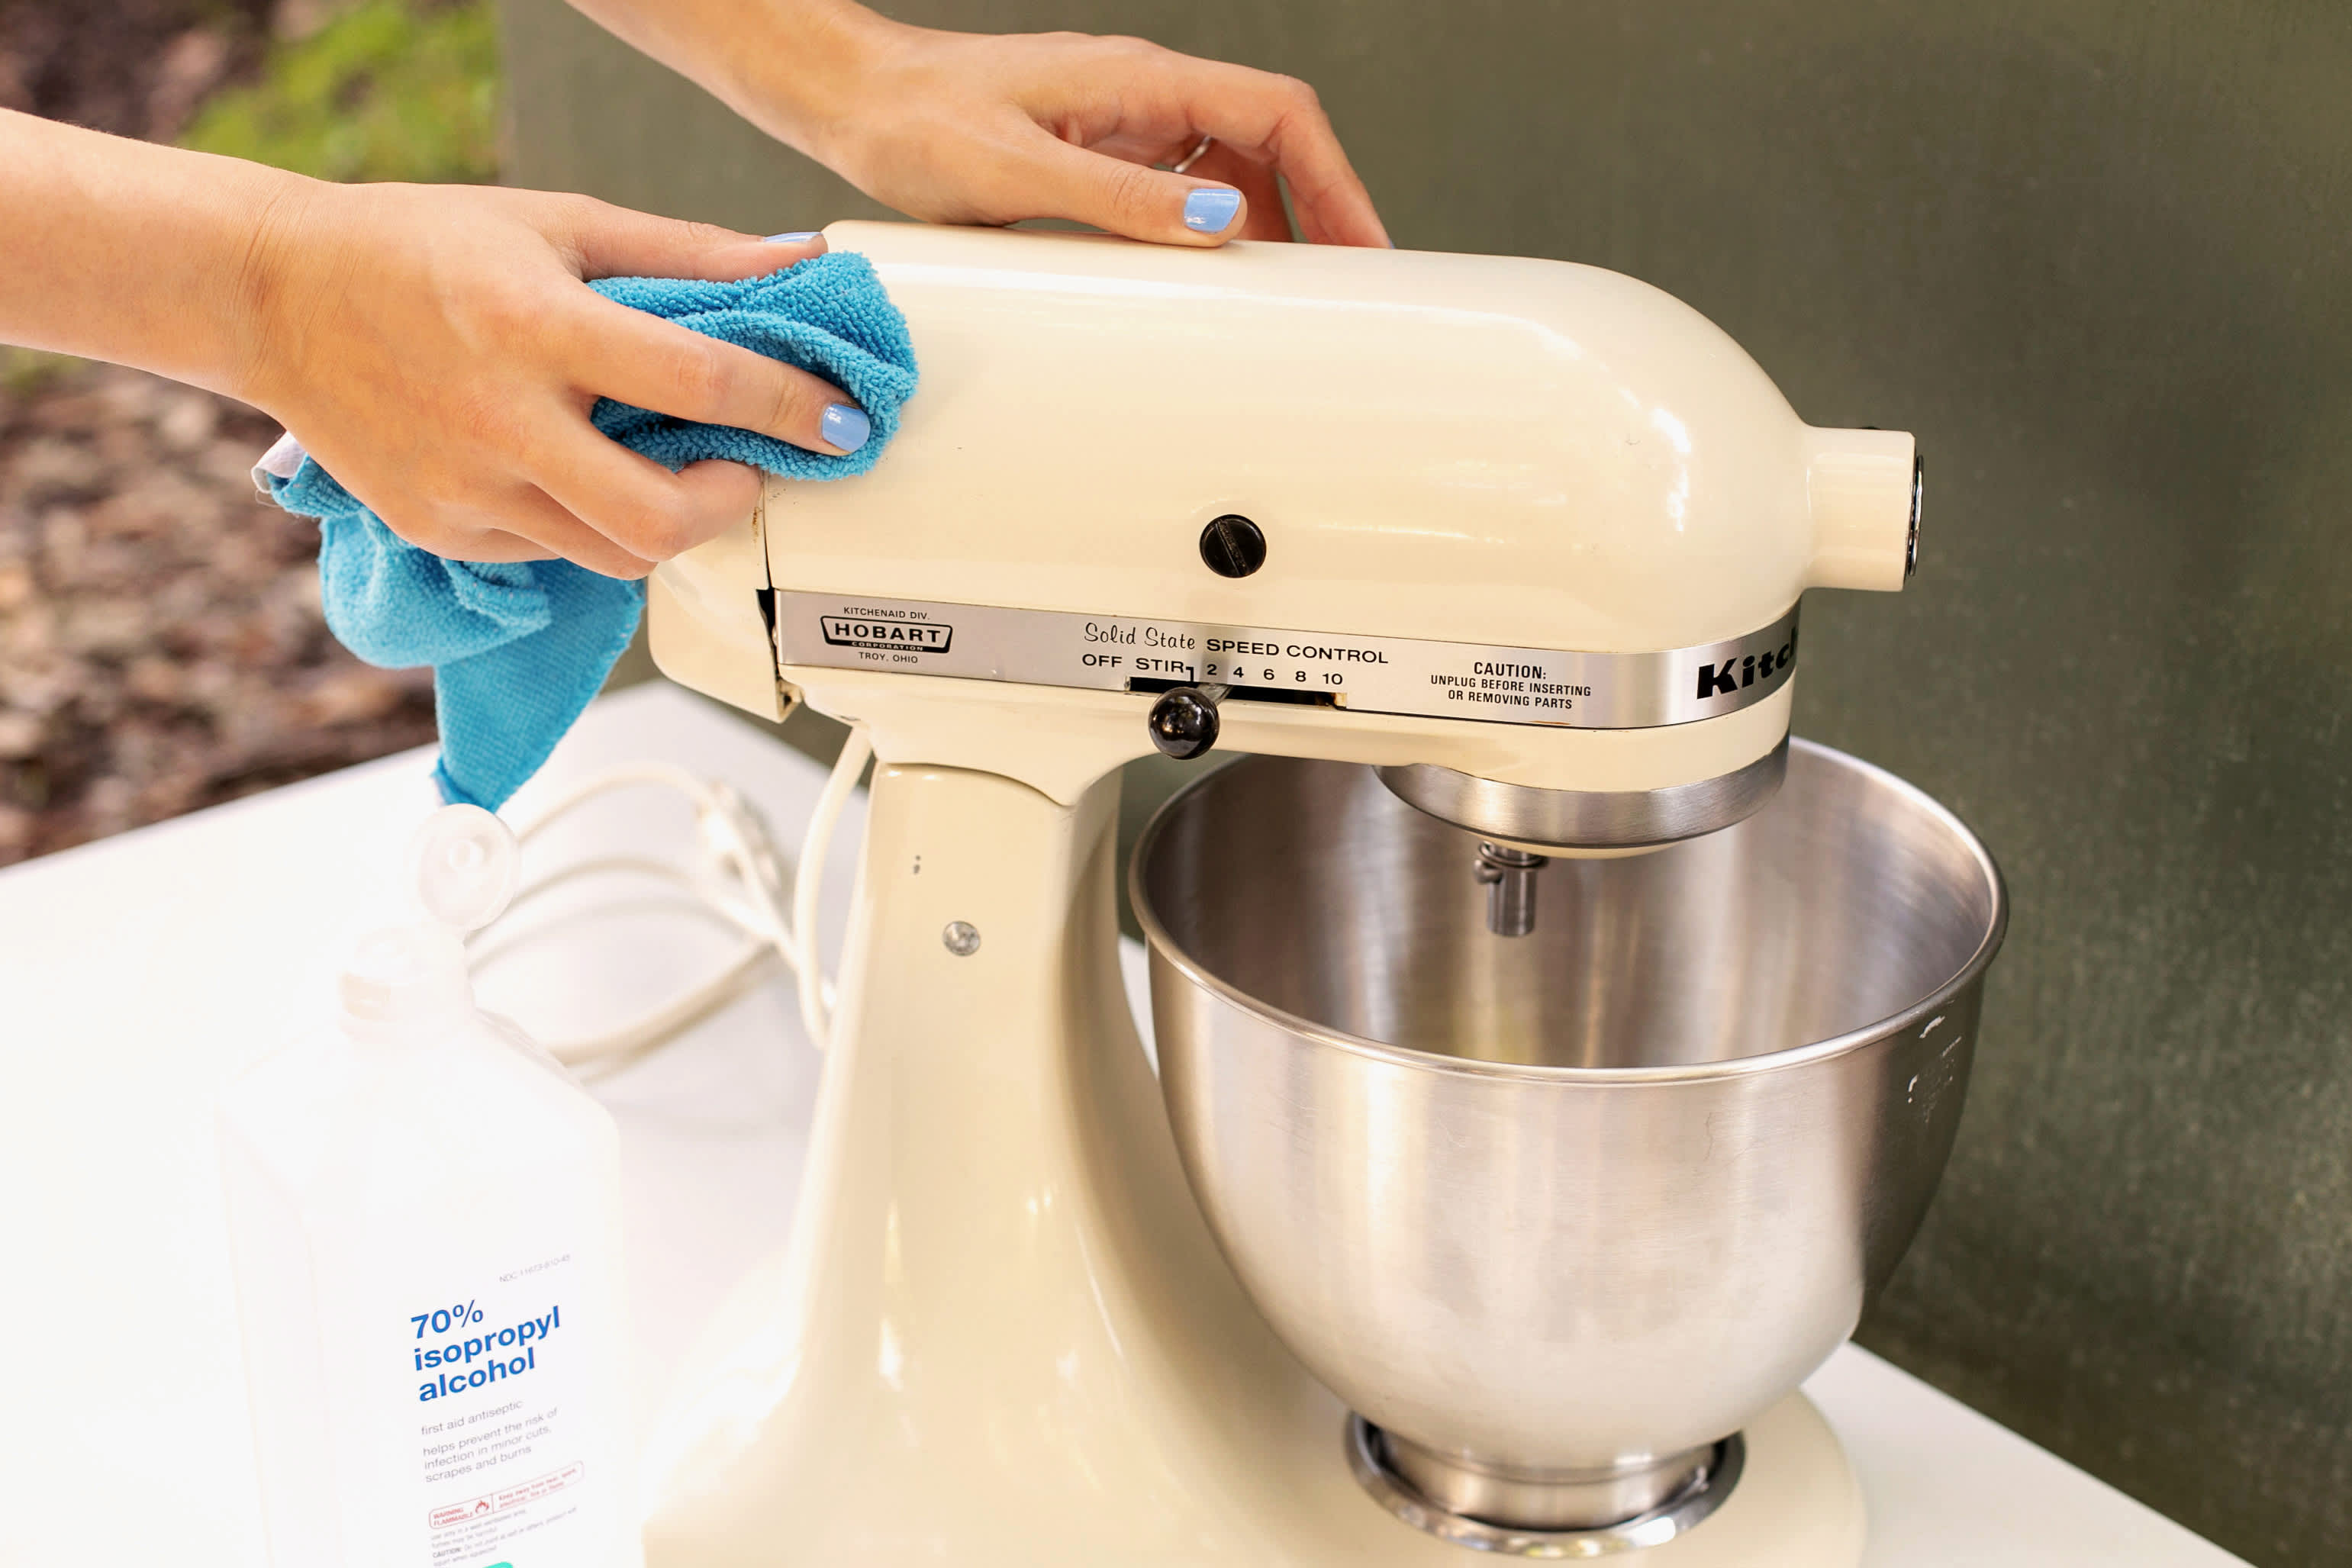 How To Paint a KitchenAid Stand Mixer   Kitchn